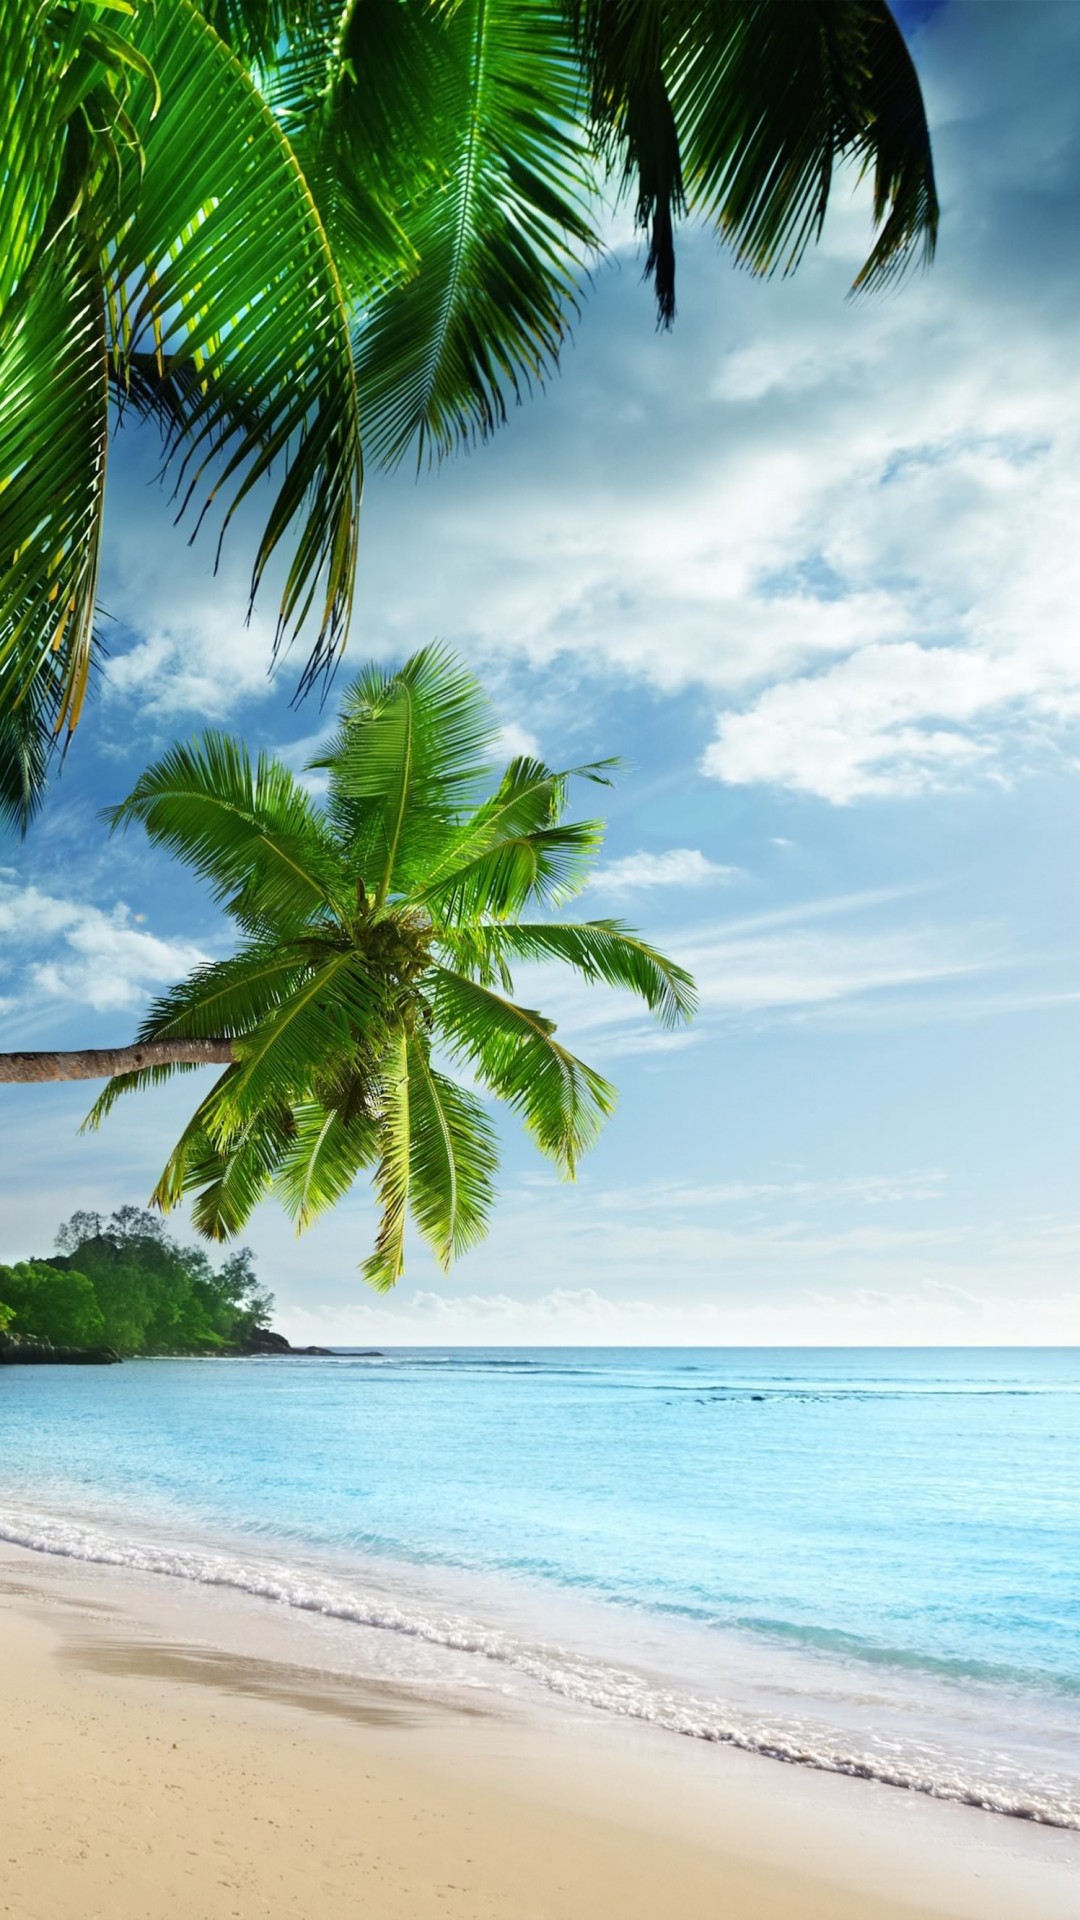 Tropical Paradise Beach Wallpaper for HTC One